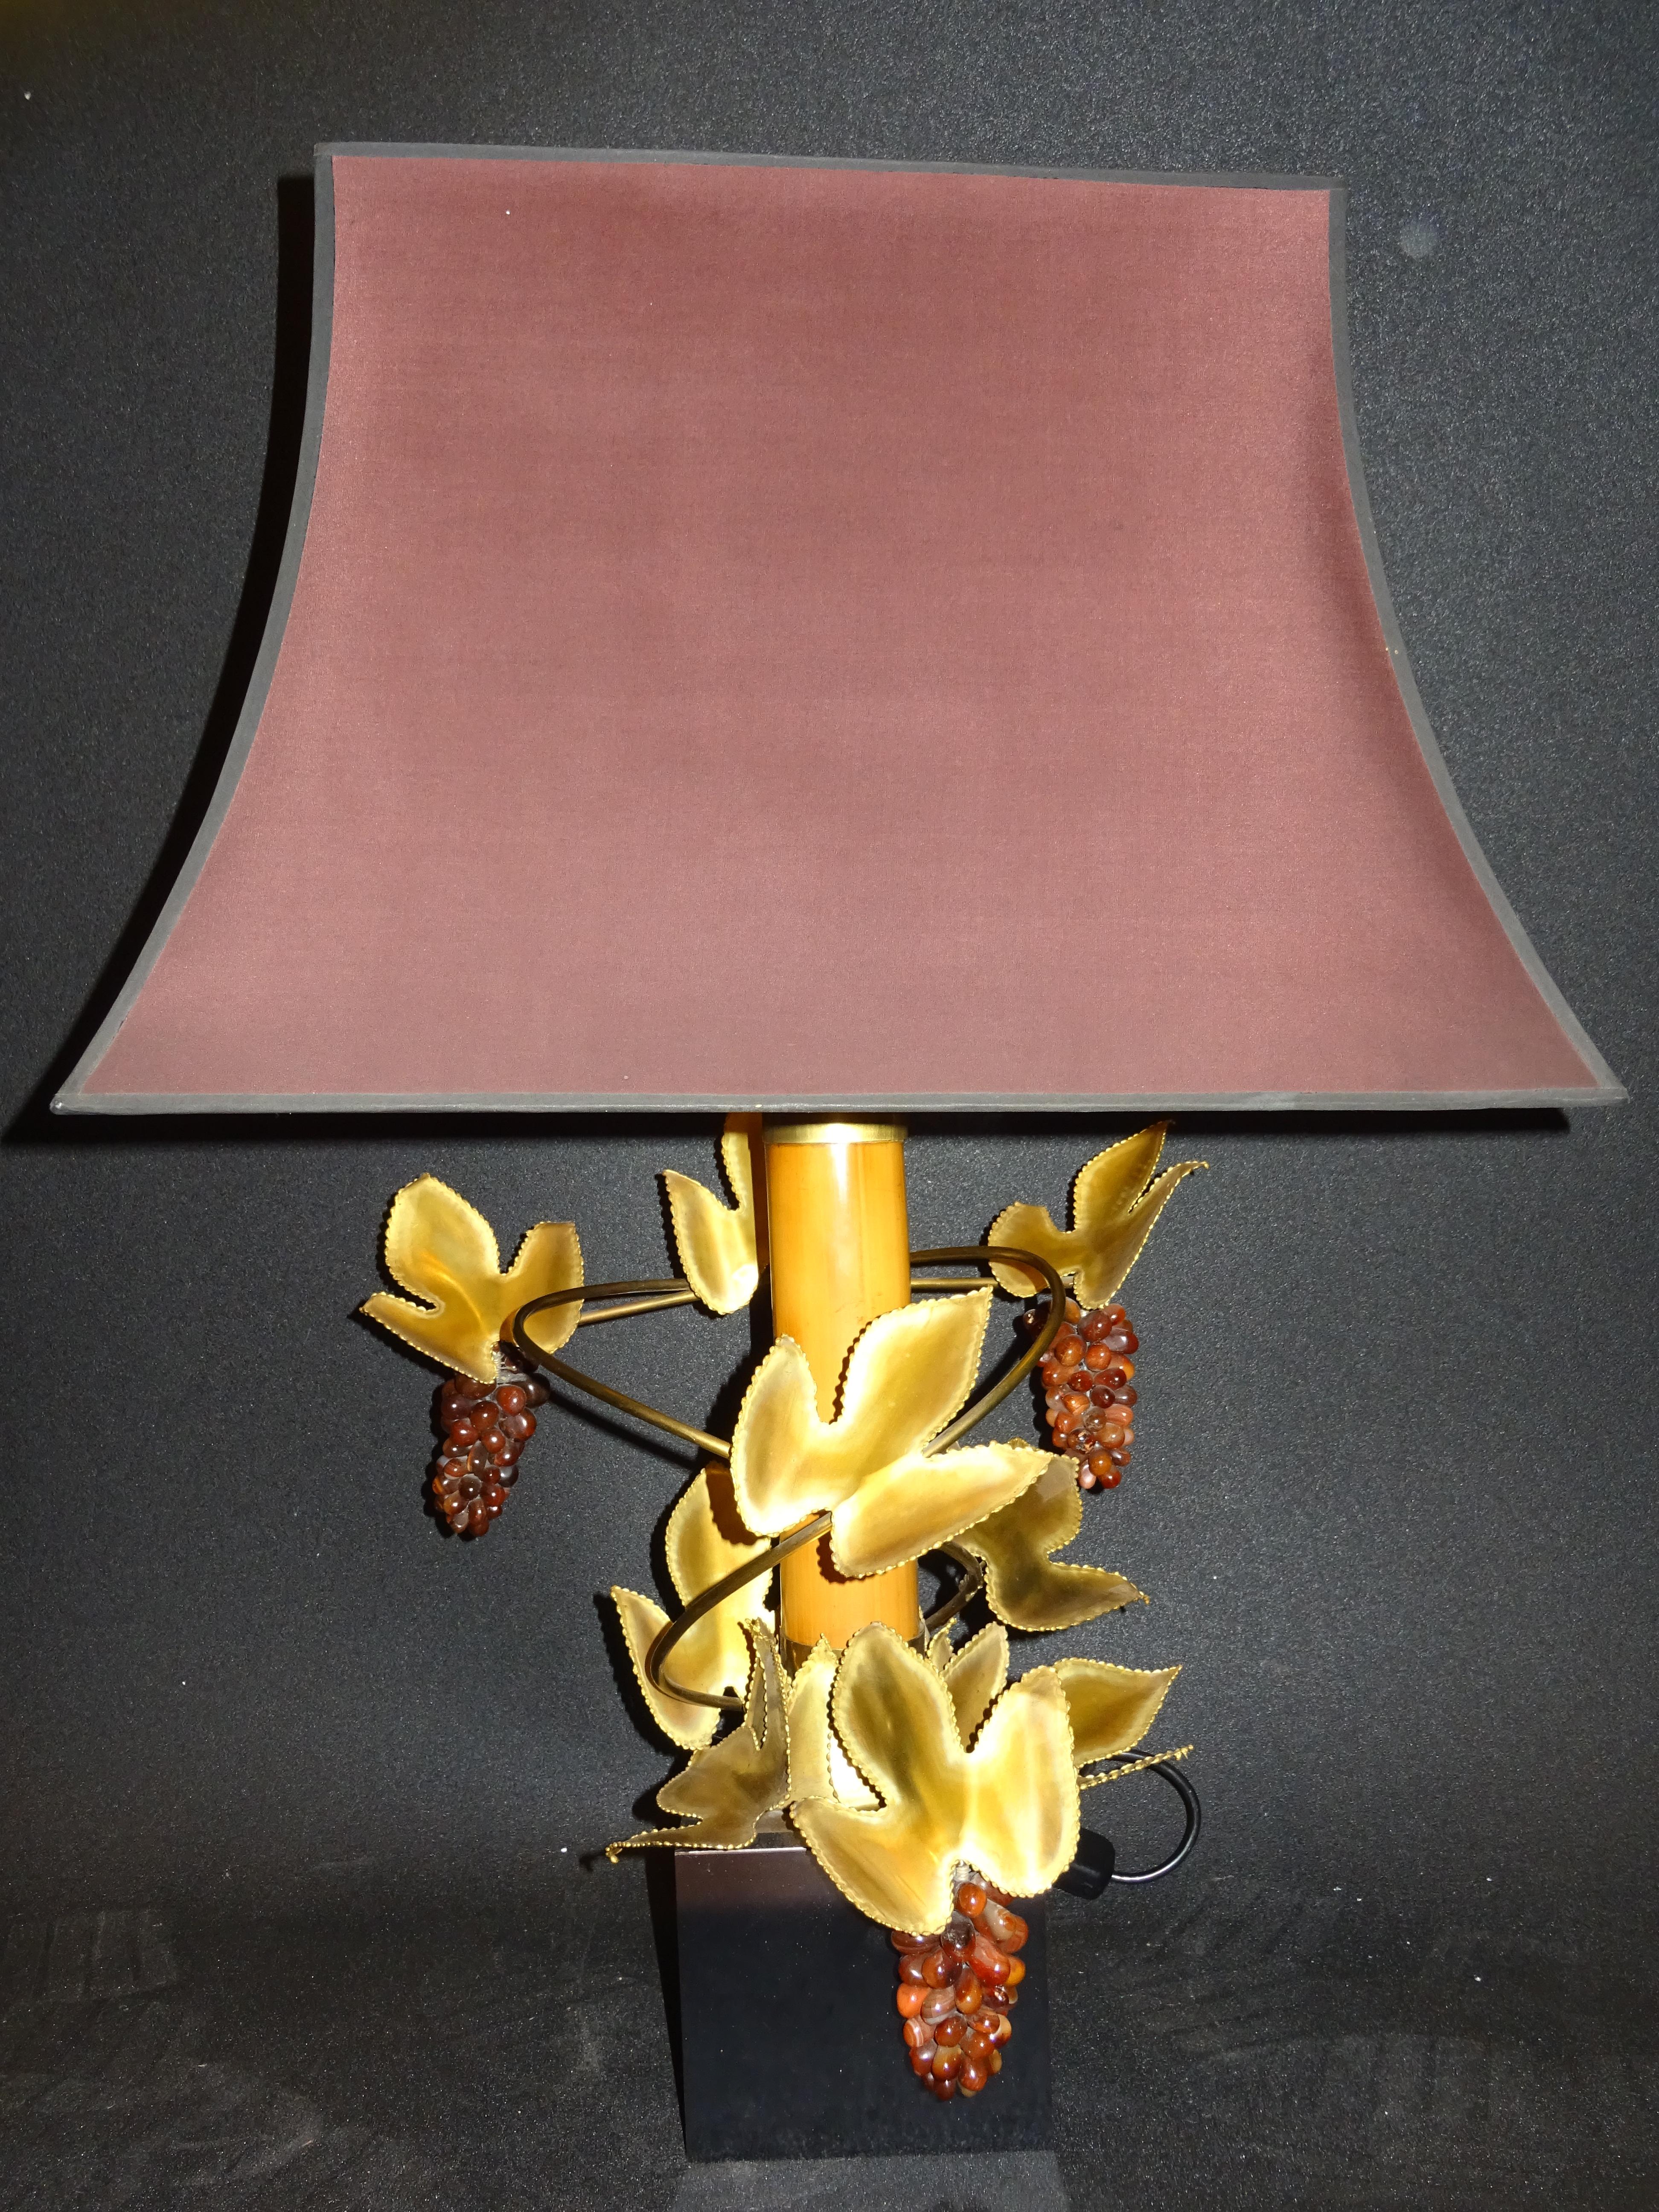 A gorgeous Maison Jansen workshop, table lamp, with purple glass grape vines and gilded brass leaves around a log in fruitwood on a black base.
The lamp is in a good used condition, it has some oxidation present.
The lampshade is in a beautiful